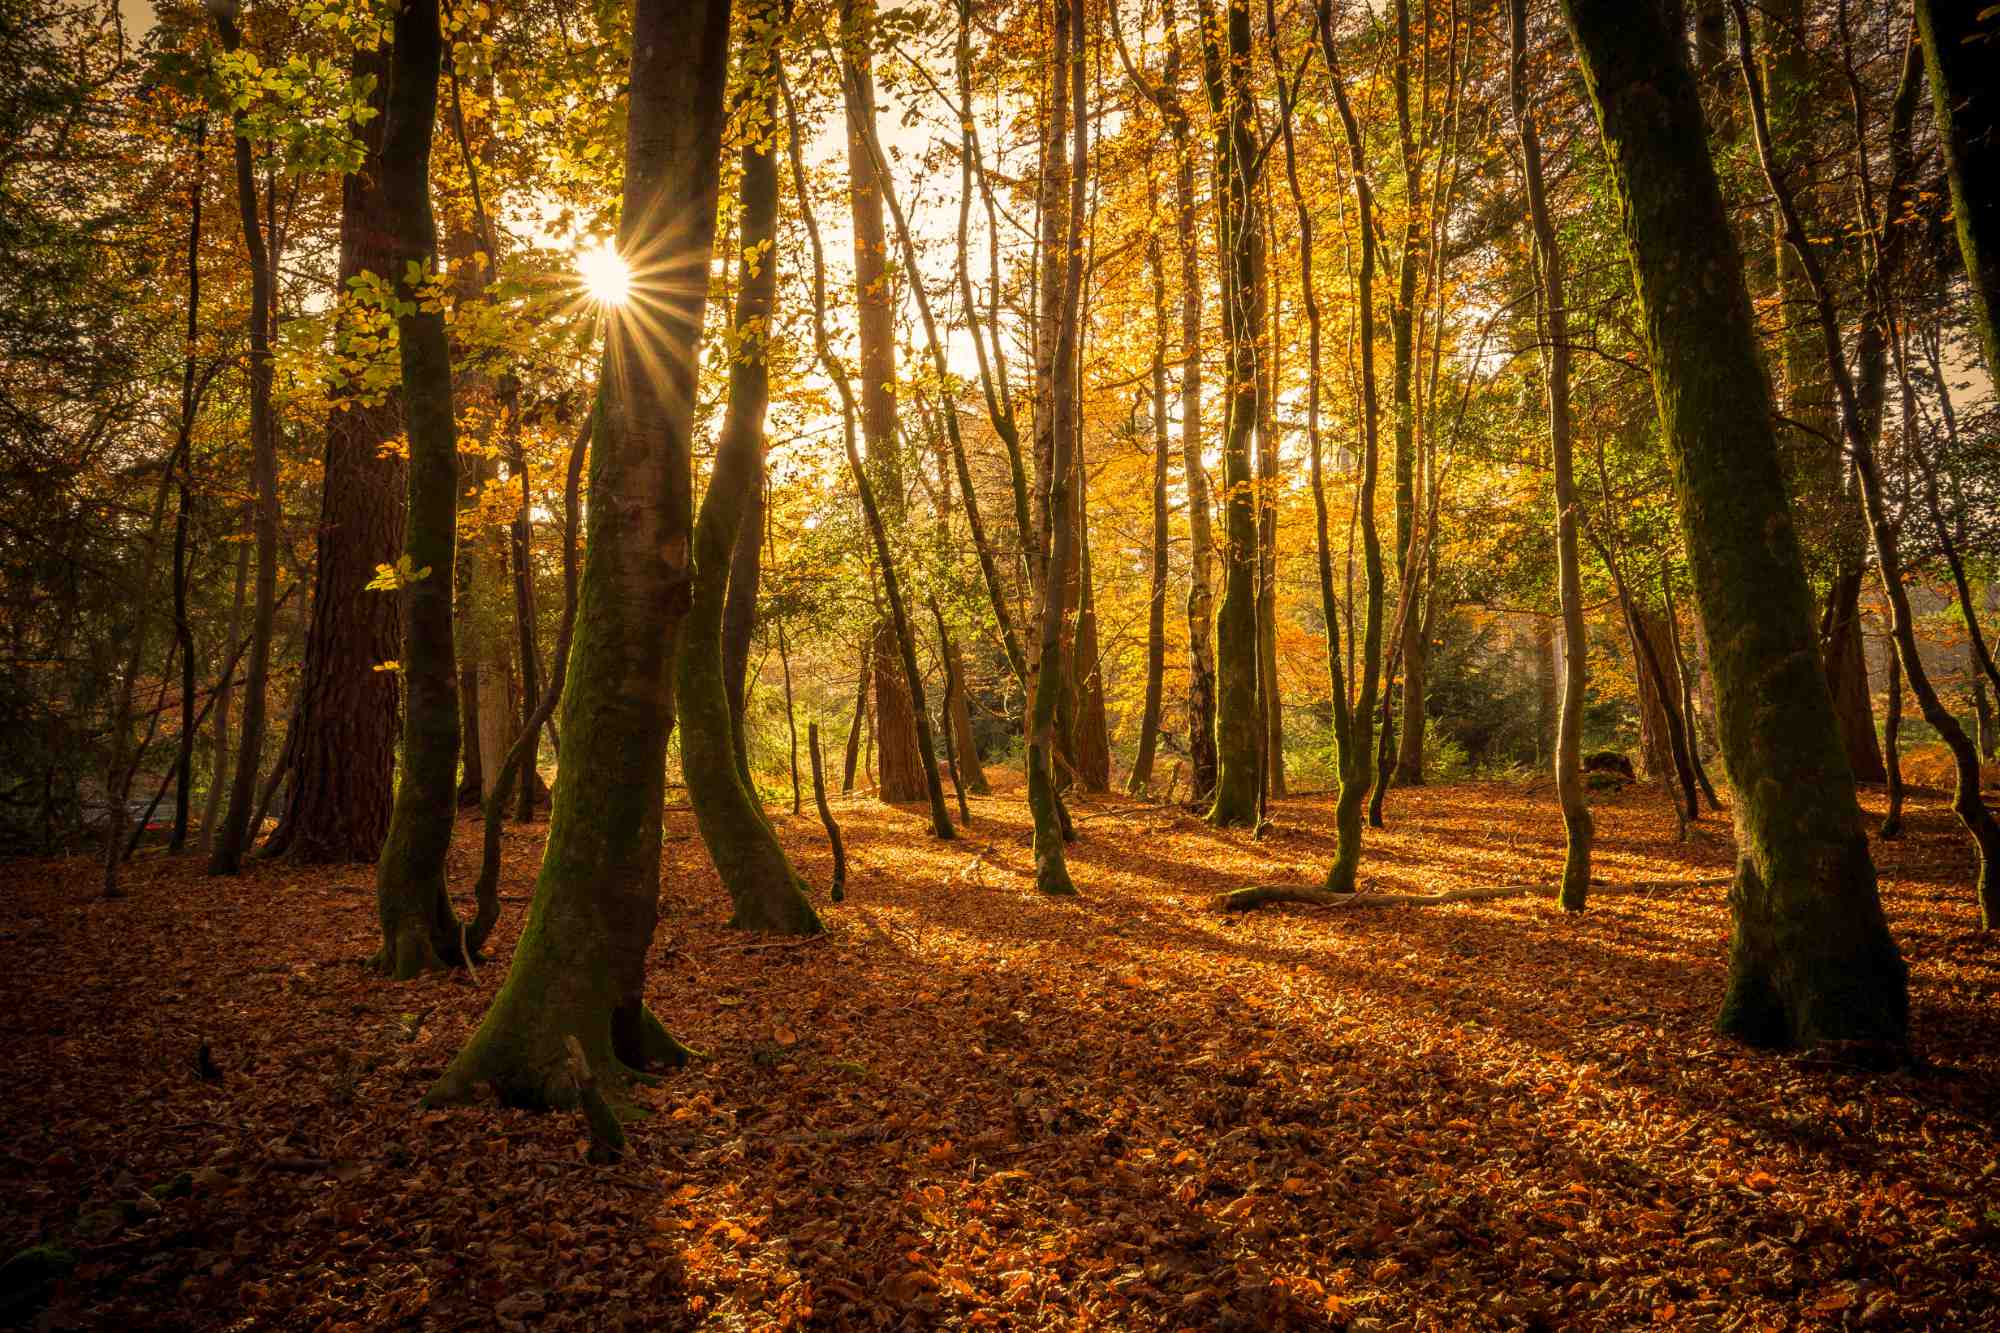 Sunlight streaming through trees in the New Forest during autumn